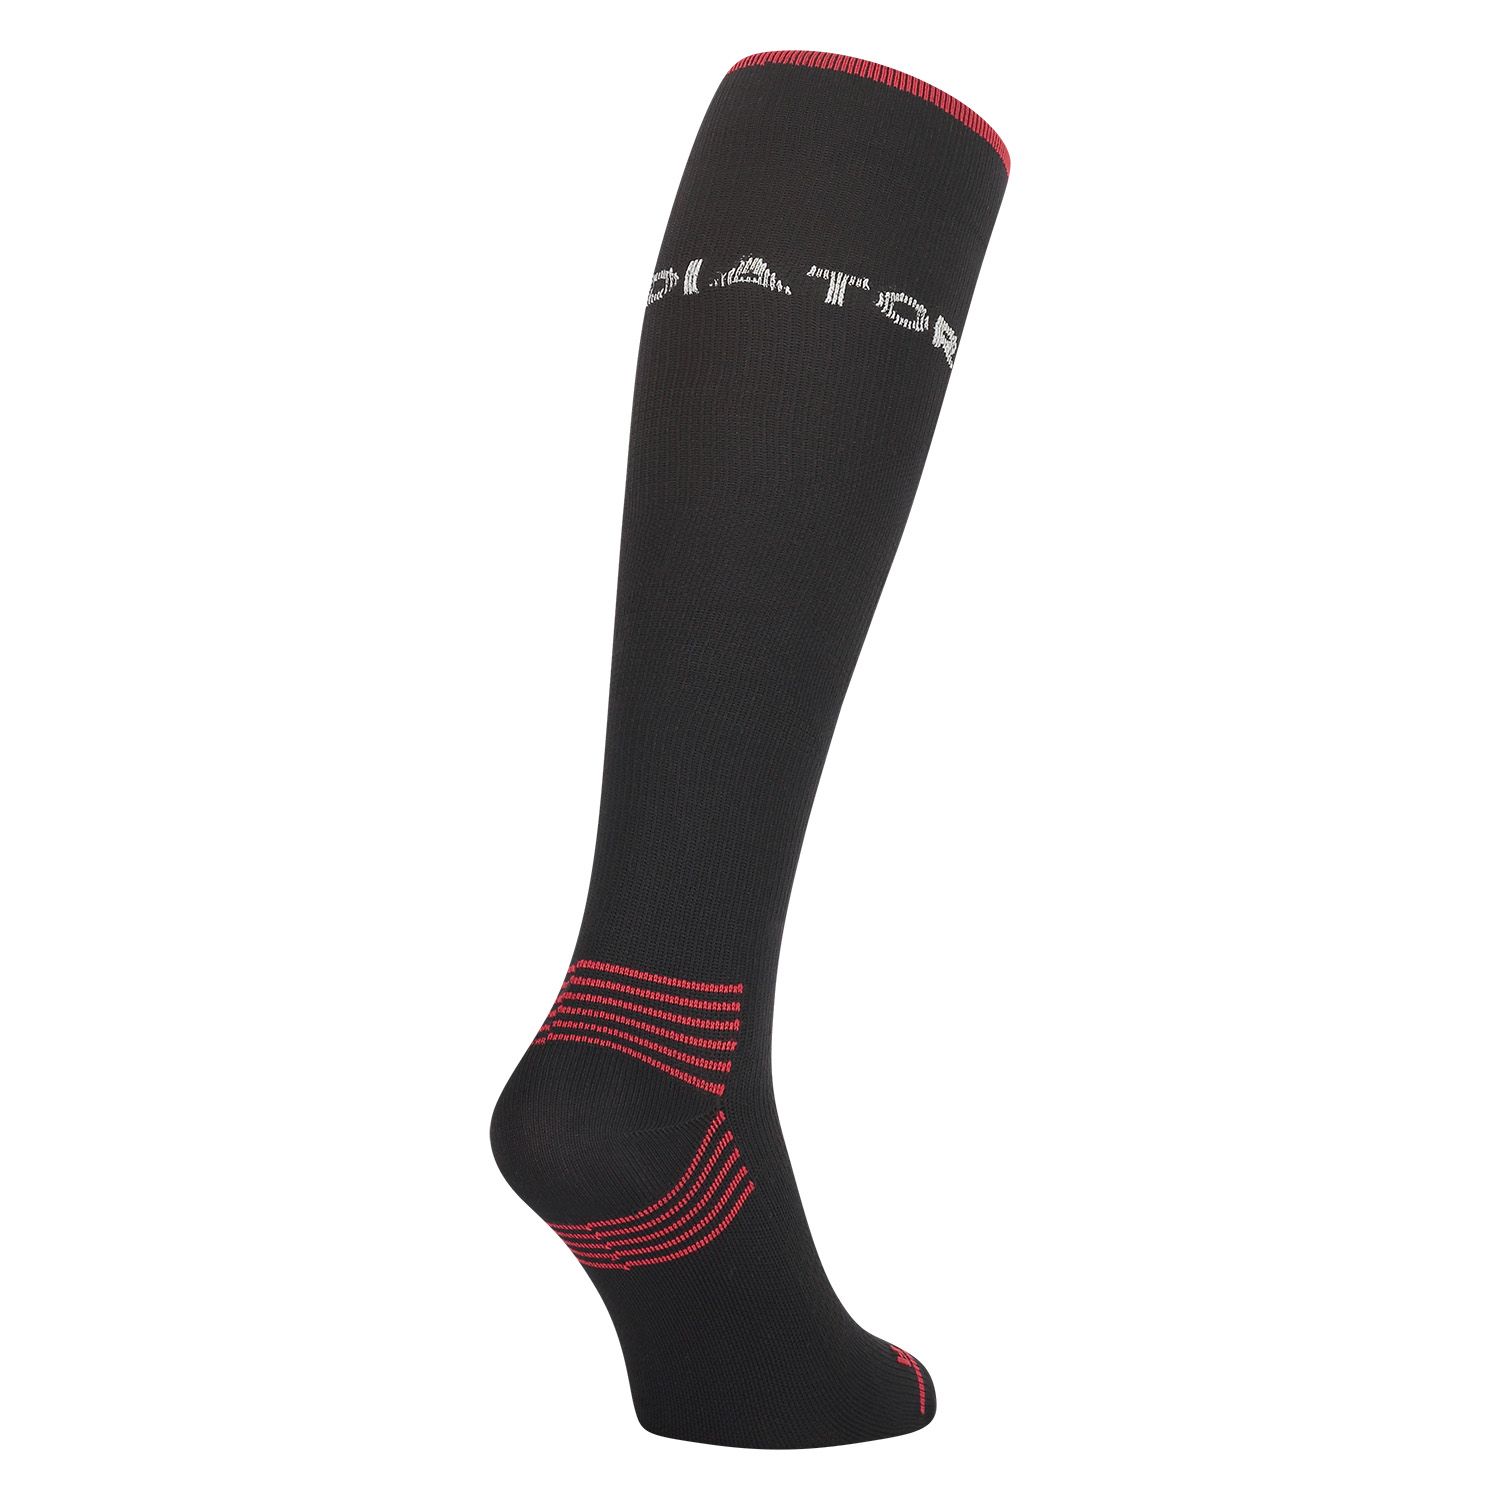 gladiator sports compression stockings product explanation